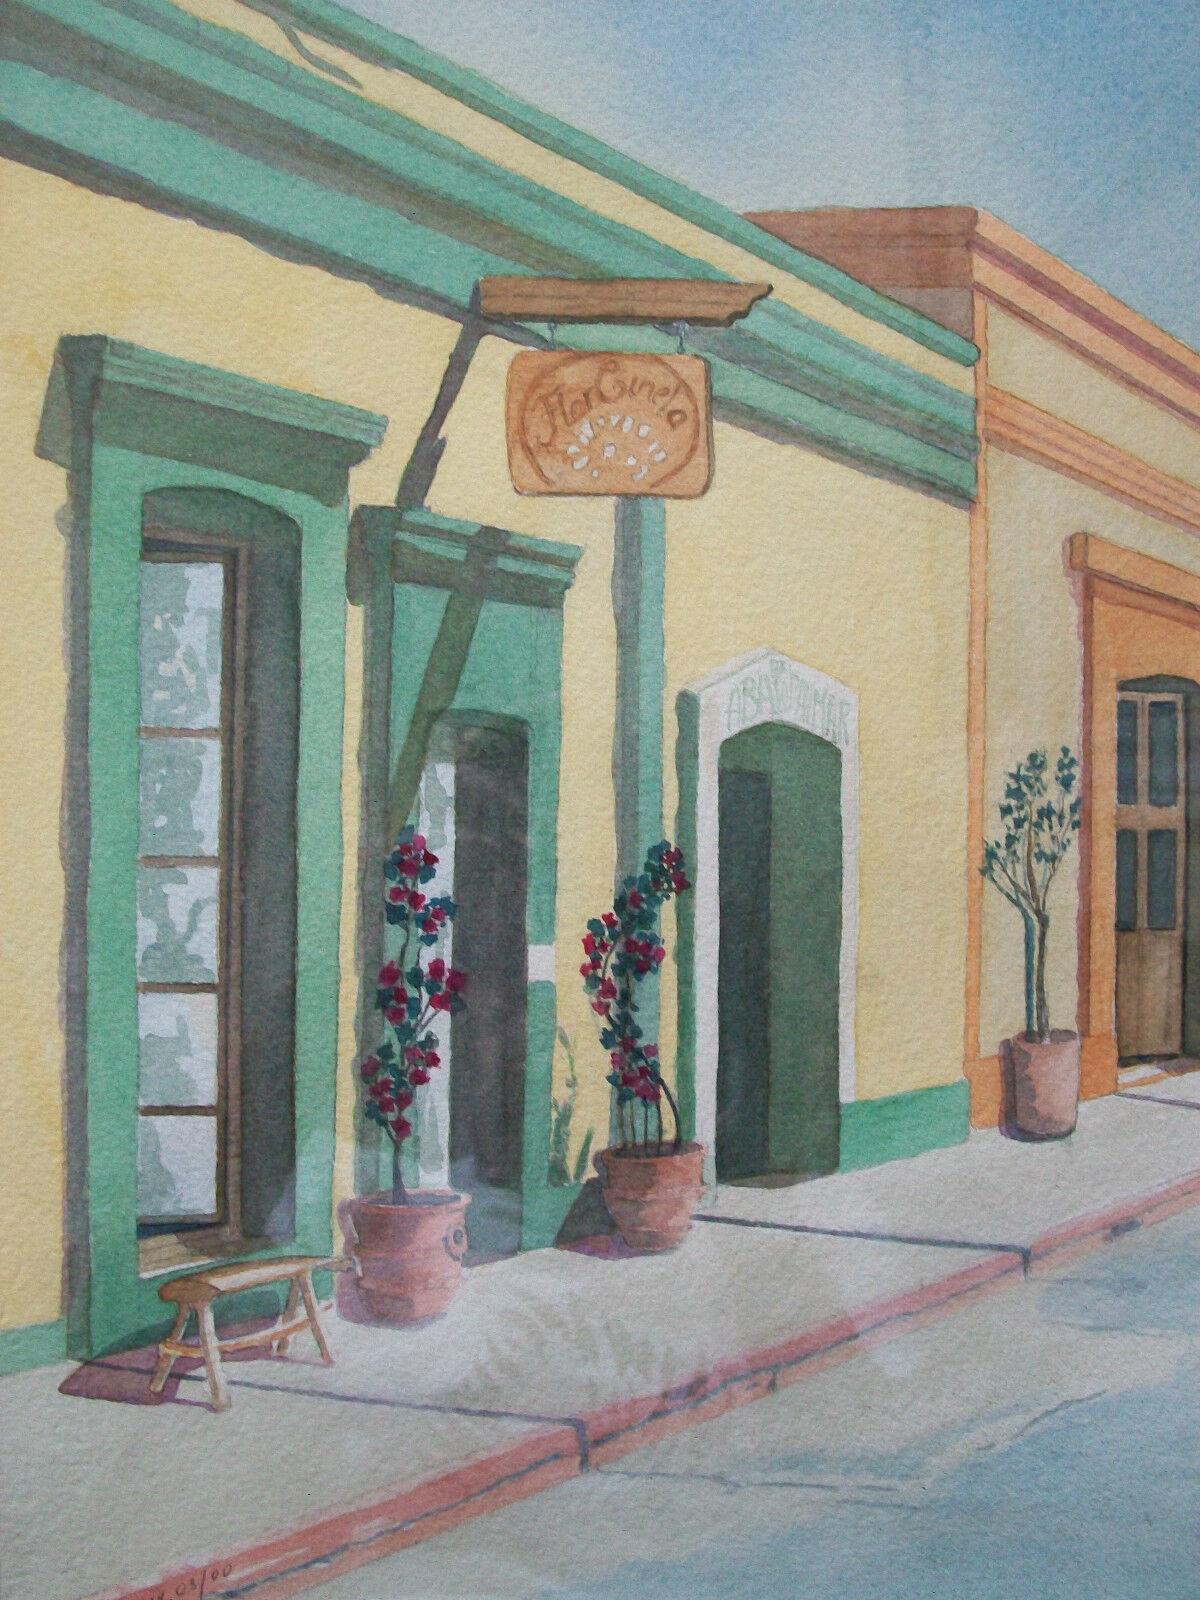 B. McKAY - Calle Alvaro Obregon - San Jose del Cabo - Vintage watercolor painting on paper - signed and dated lower left - titled and dated verso - contained in a bronze finish metal frame - finished with a single bevel edged matte board - circa